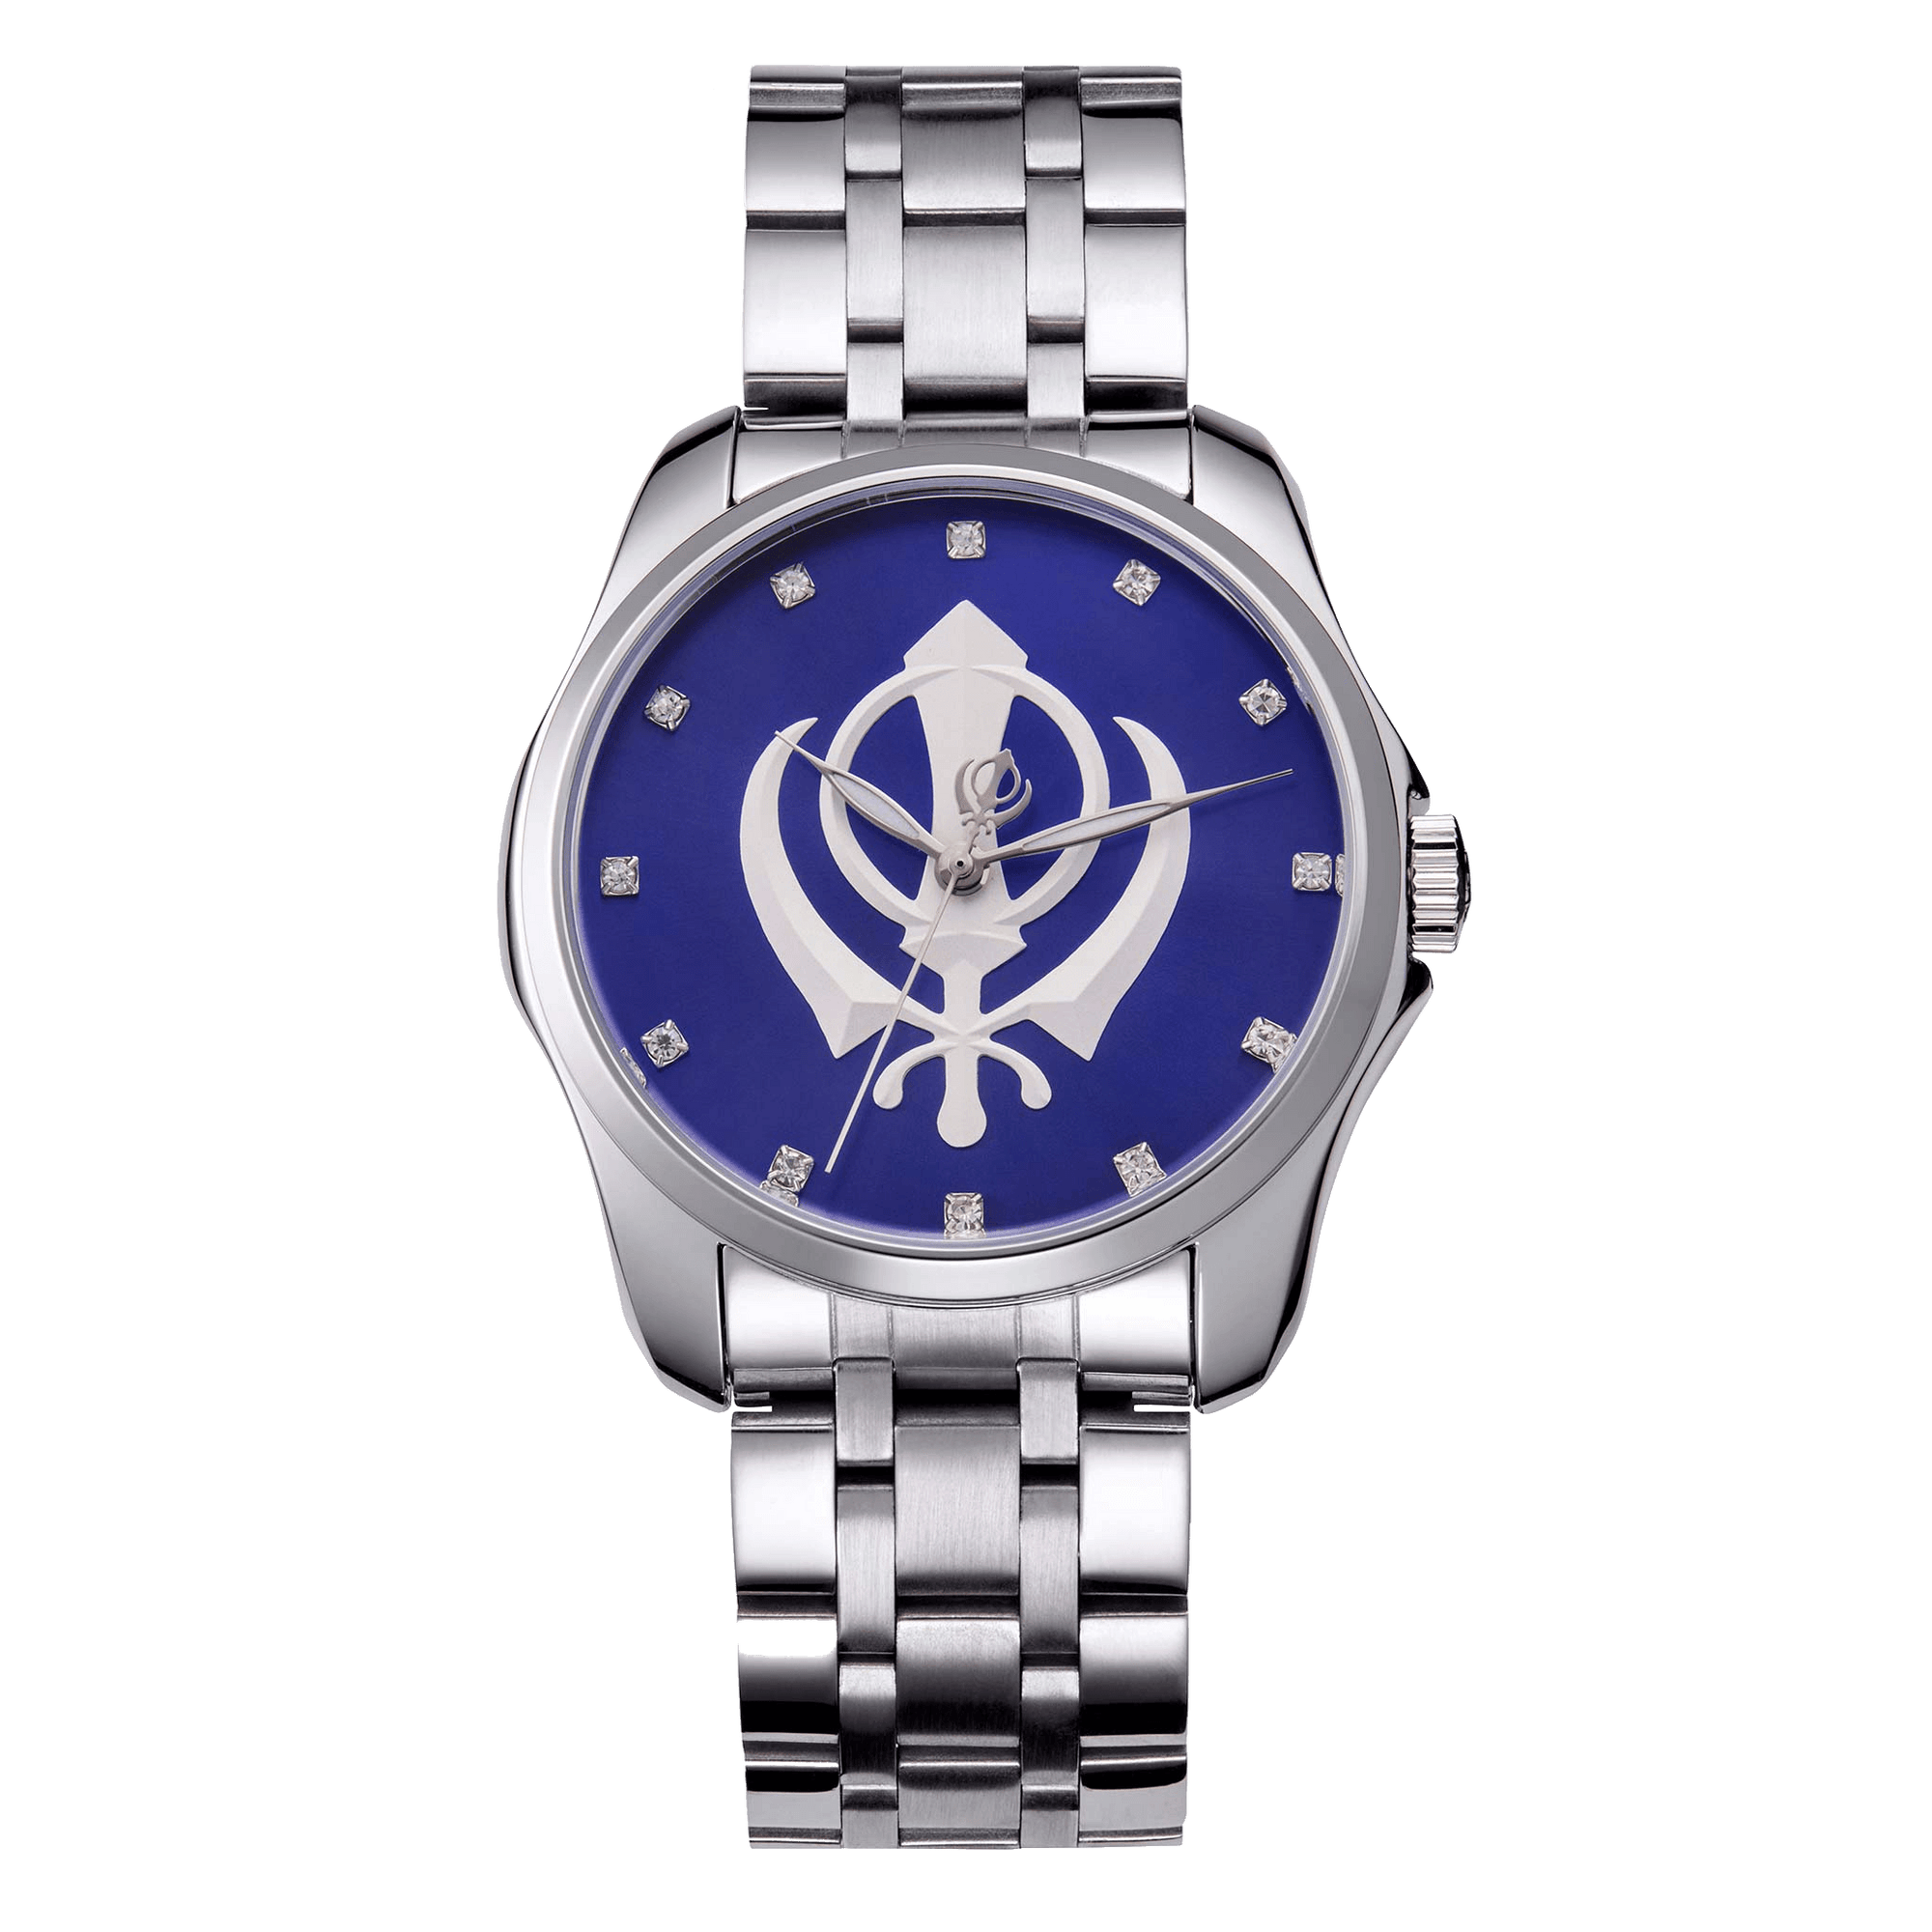 House of Khalsa's Heritage Blue Steel - The Best Stainless Steel Sikh Watch With Khanda Symbol on the Dial, Crown, and Back